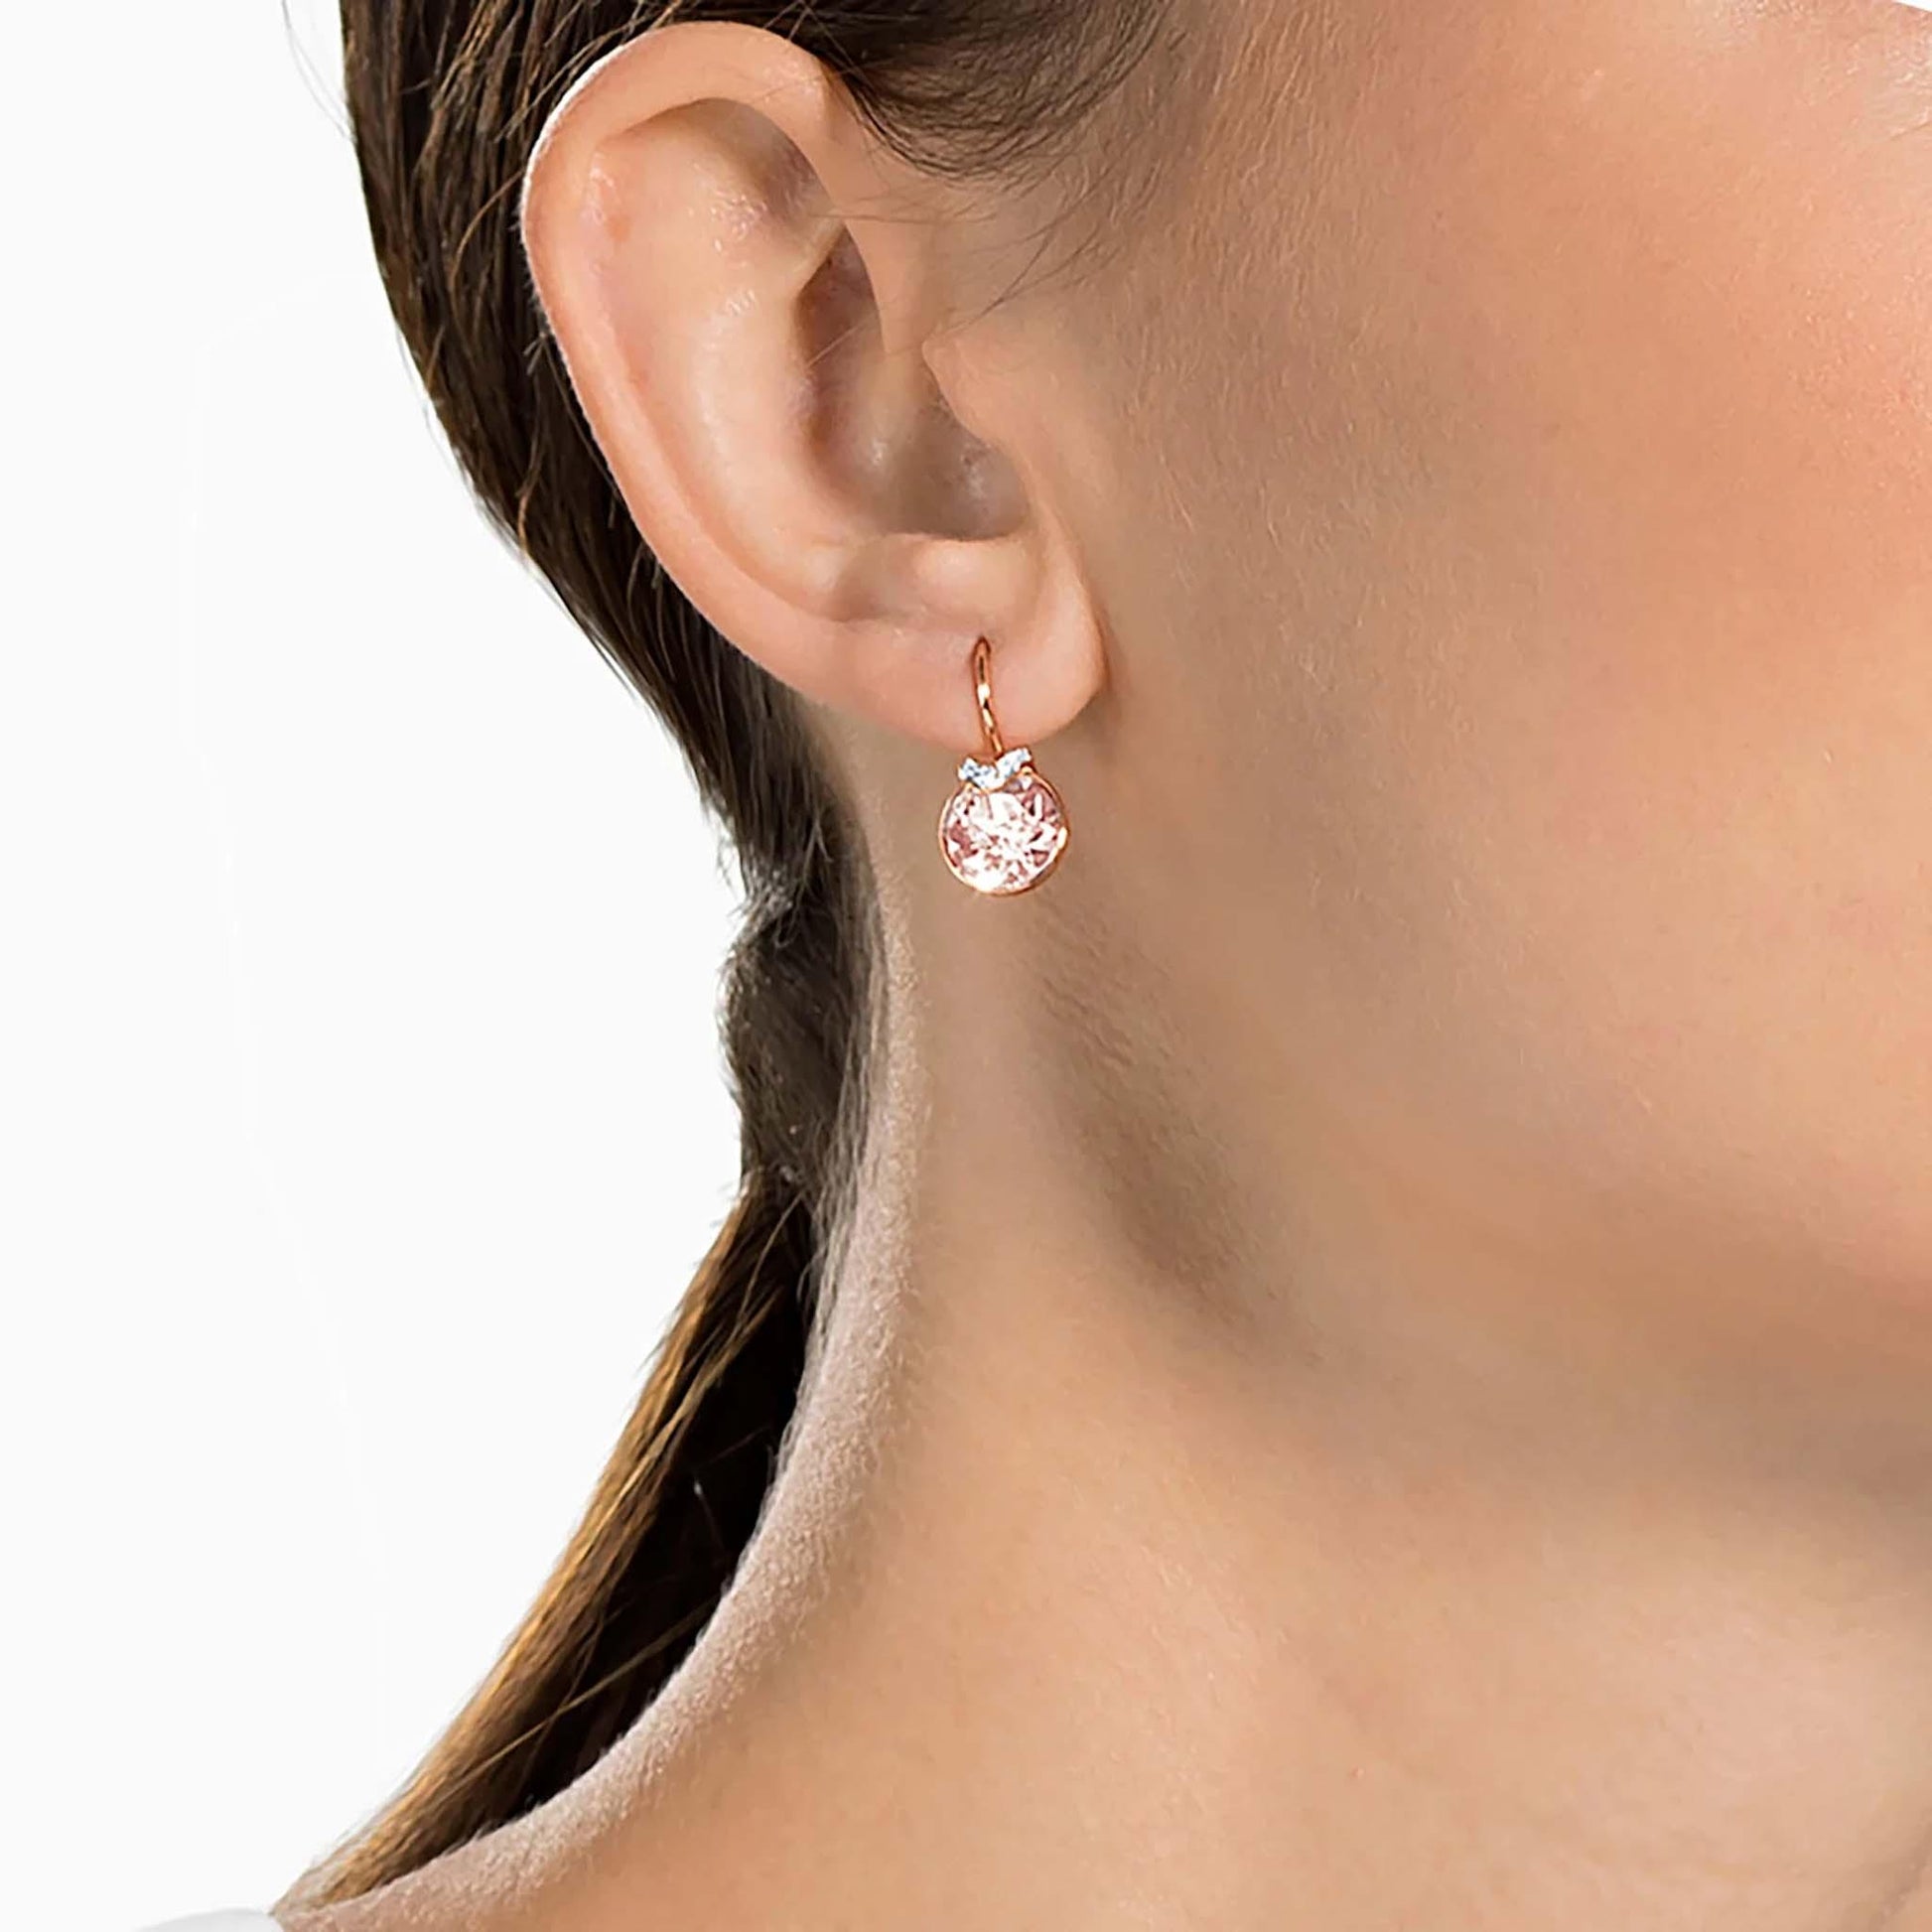 Bella V earrings - Cosmos Boutique New Jersey